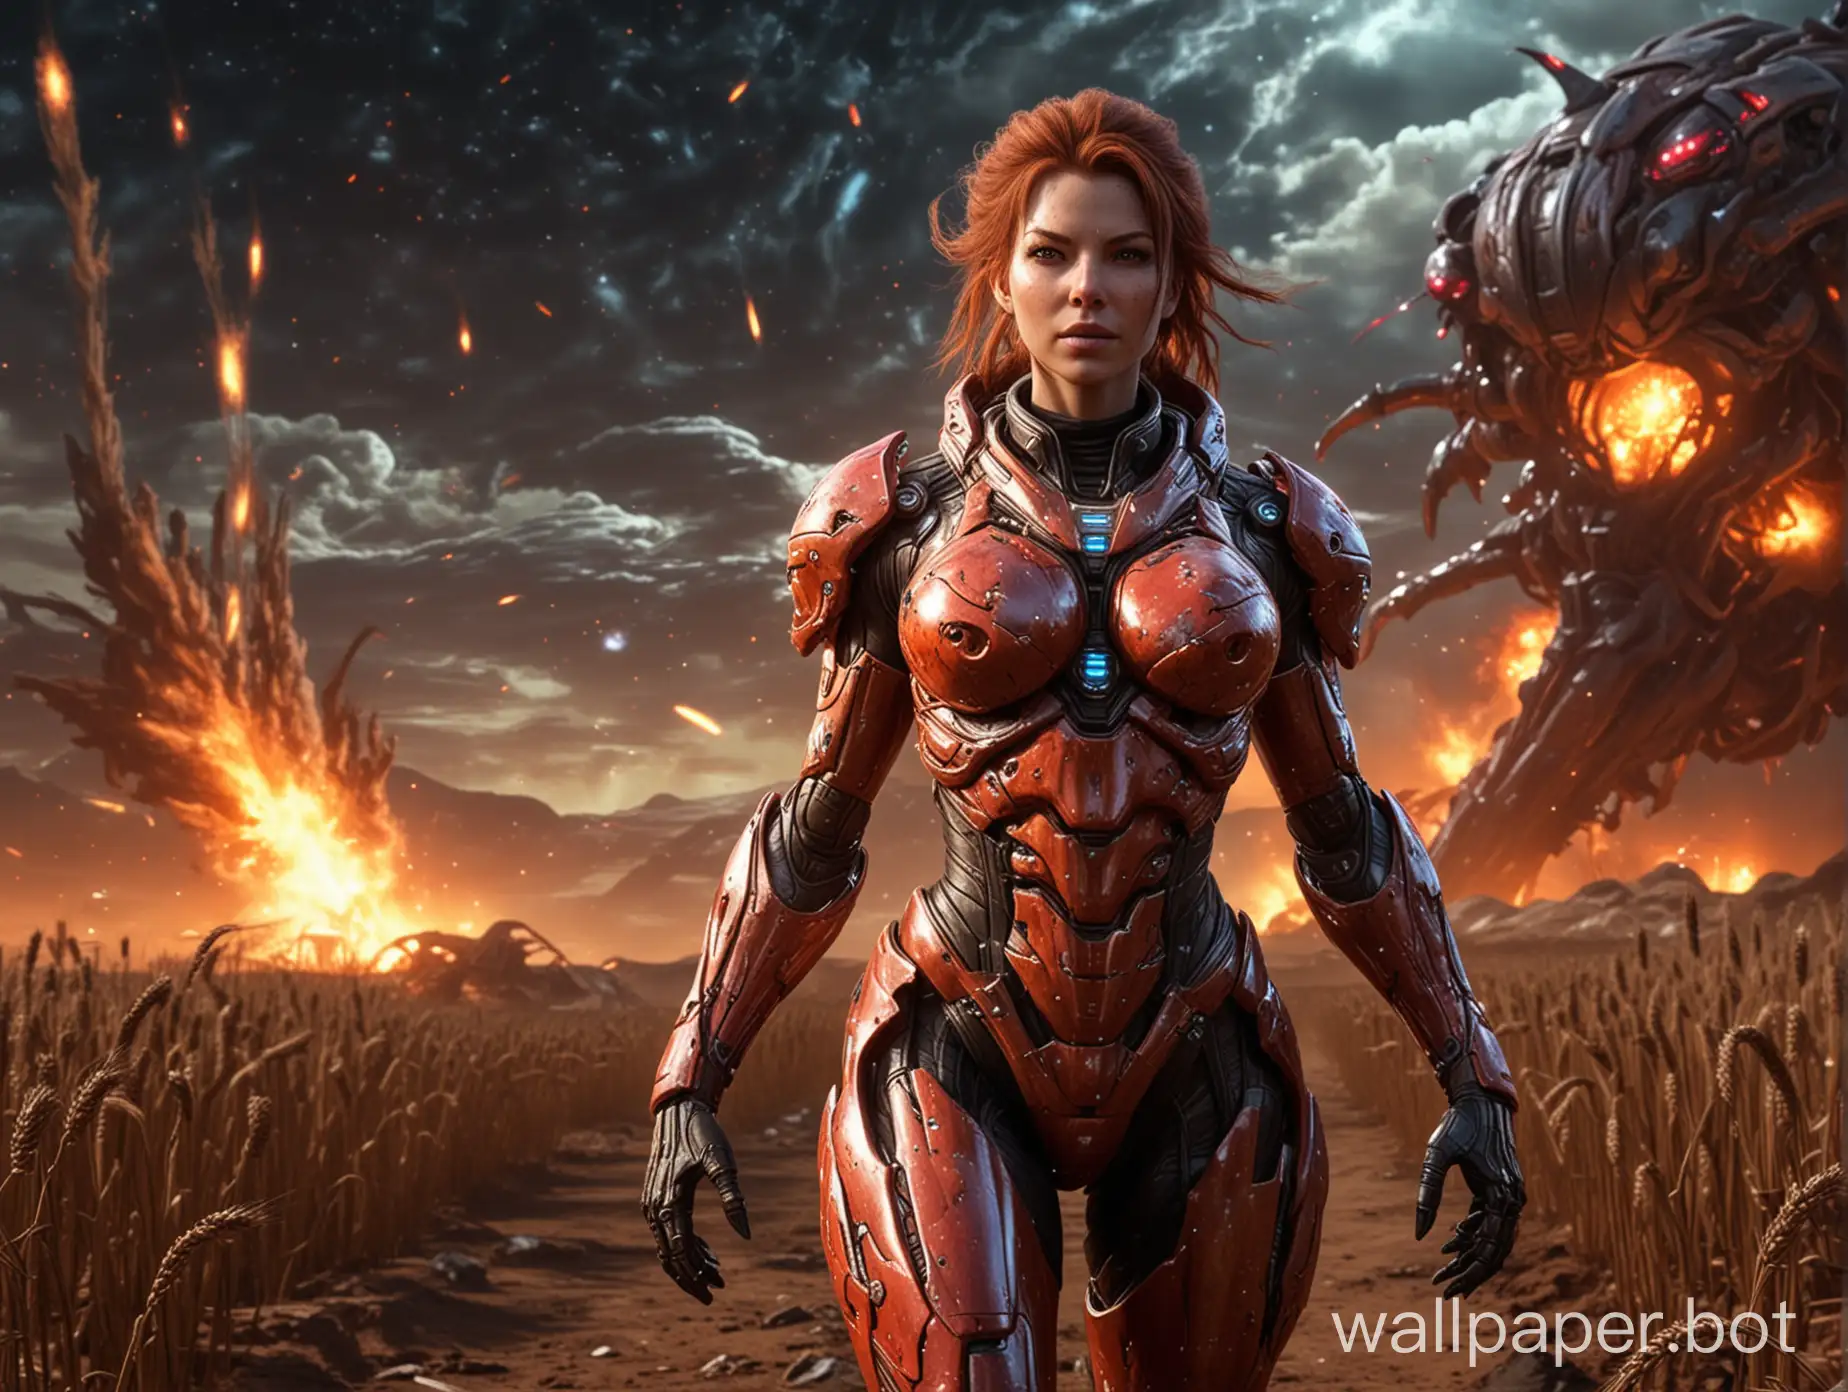 Sarah Kerrigan from Starcraft in futuristic armor walks on an alien planet. Eyes glow bright red. Full height. Stars shine brightly in the sky. Fire and explosions in the background. Wheat running in the backdrop. Spaceships in the sky